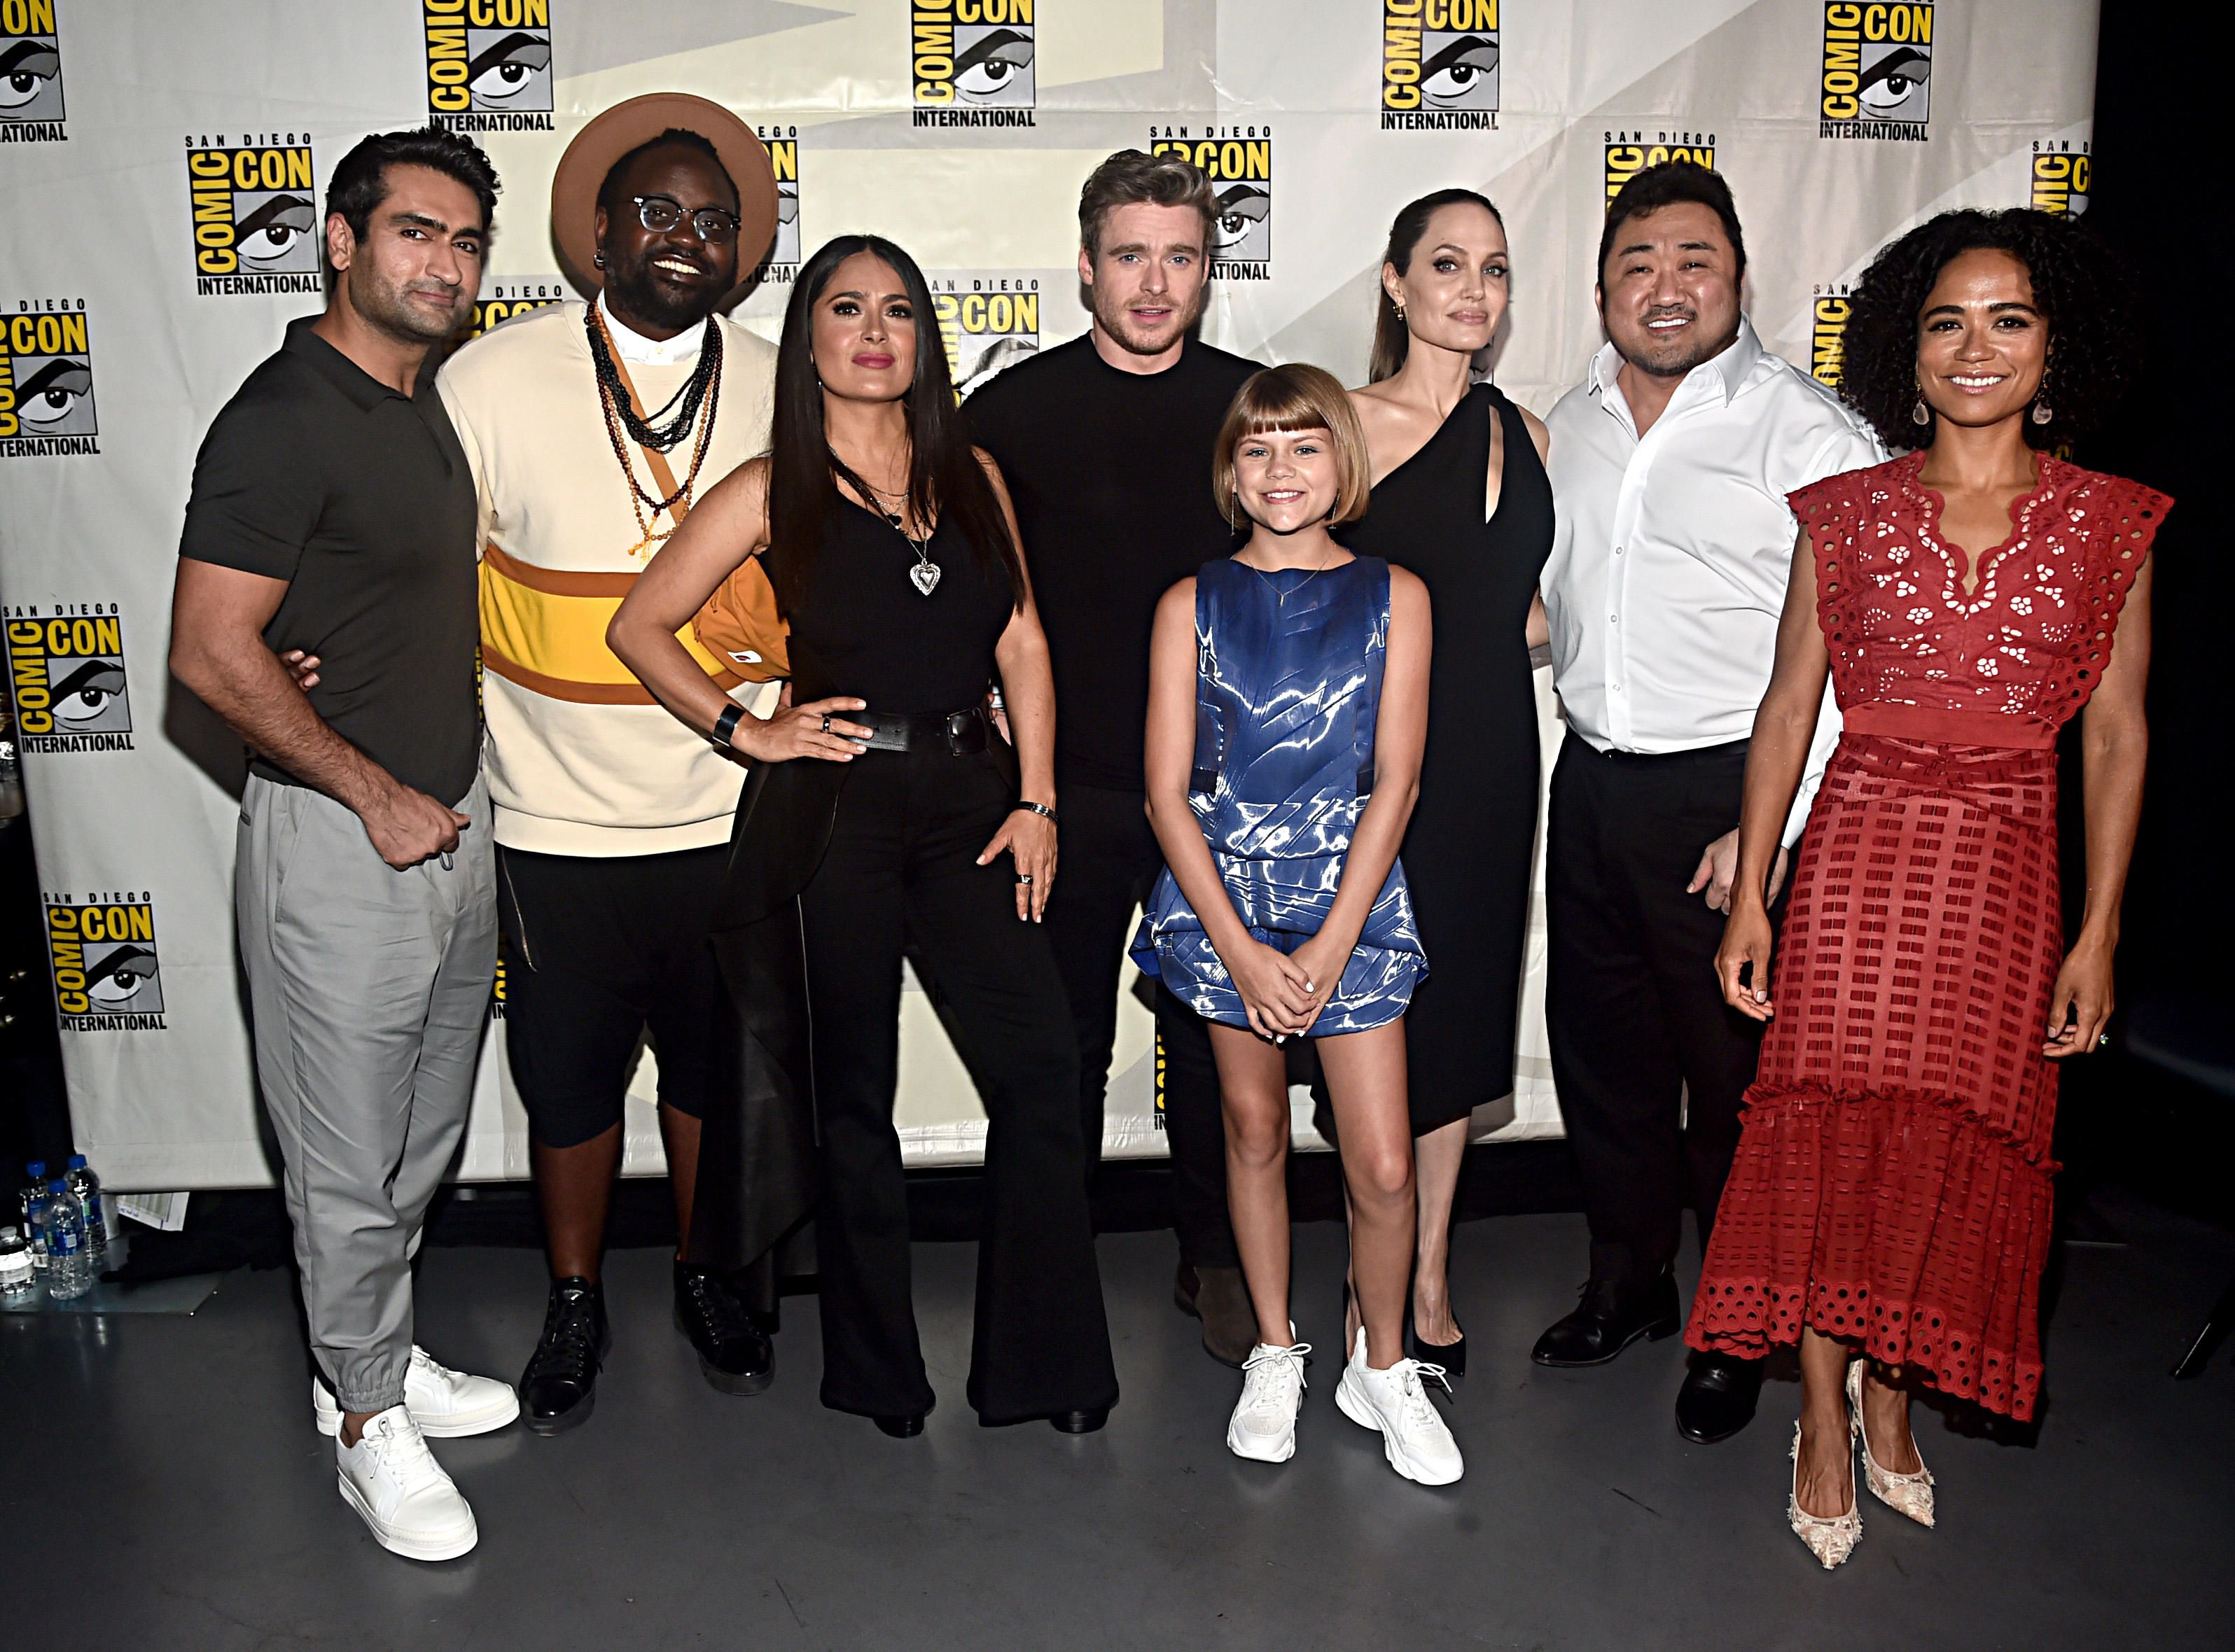 The Eternals at SDCC